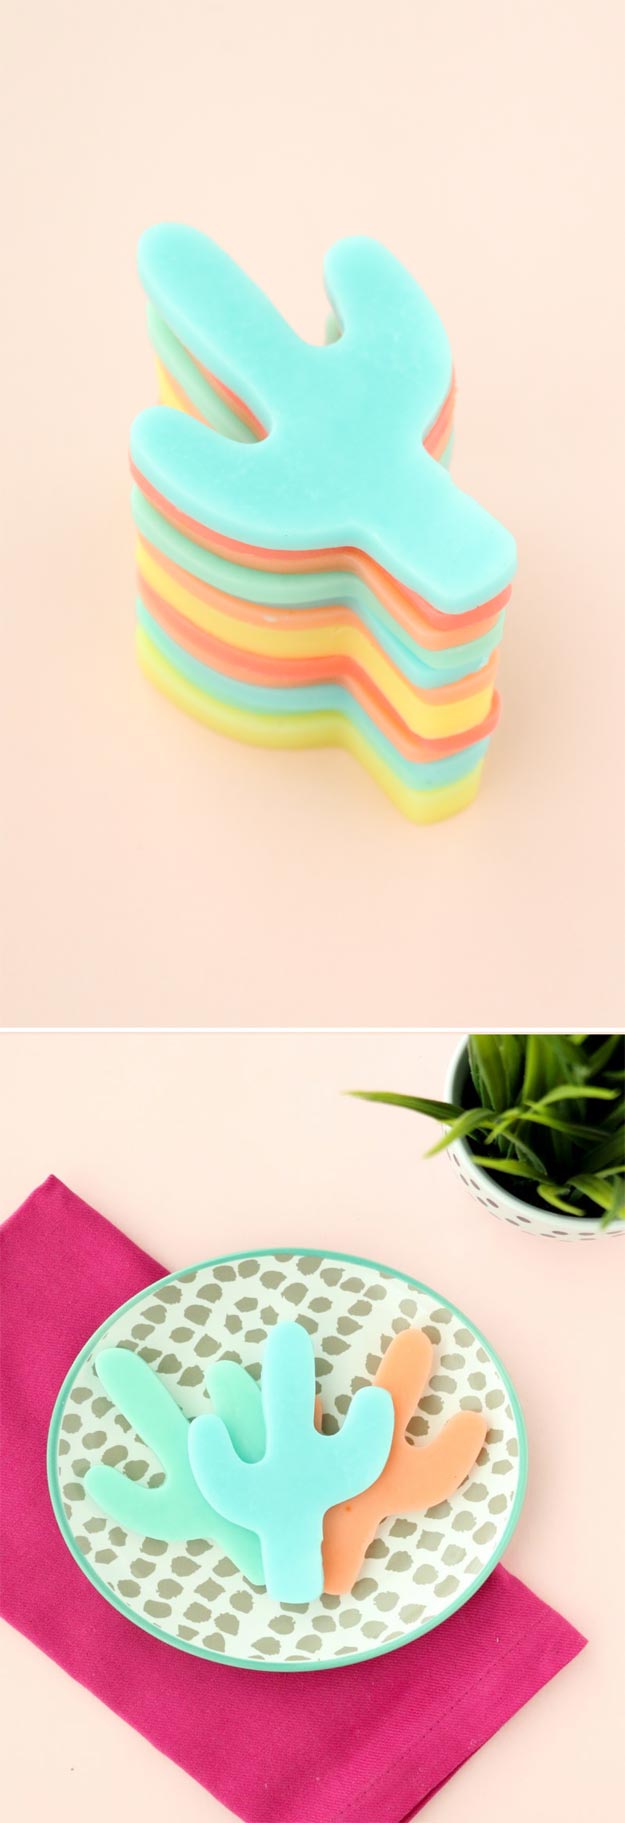 Easy Cactus Craft - DIY Colorful Cacti Soaps - Homemade Cactus Party Idea - Cactus Craft for Room - Crafts to do With Kids - Cute and Easy Crafts - Quick Crafts to Make at Home #diycrafts #makeandsell #cactusdecor